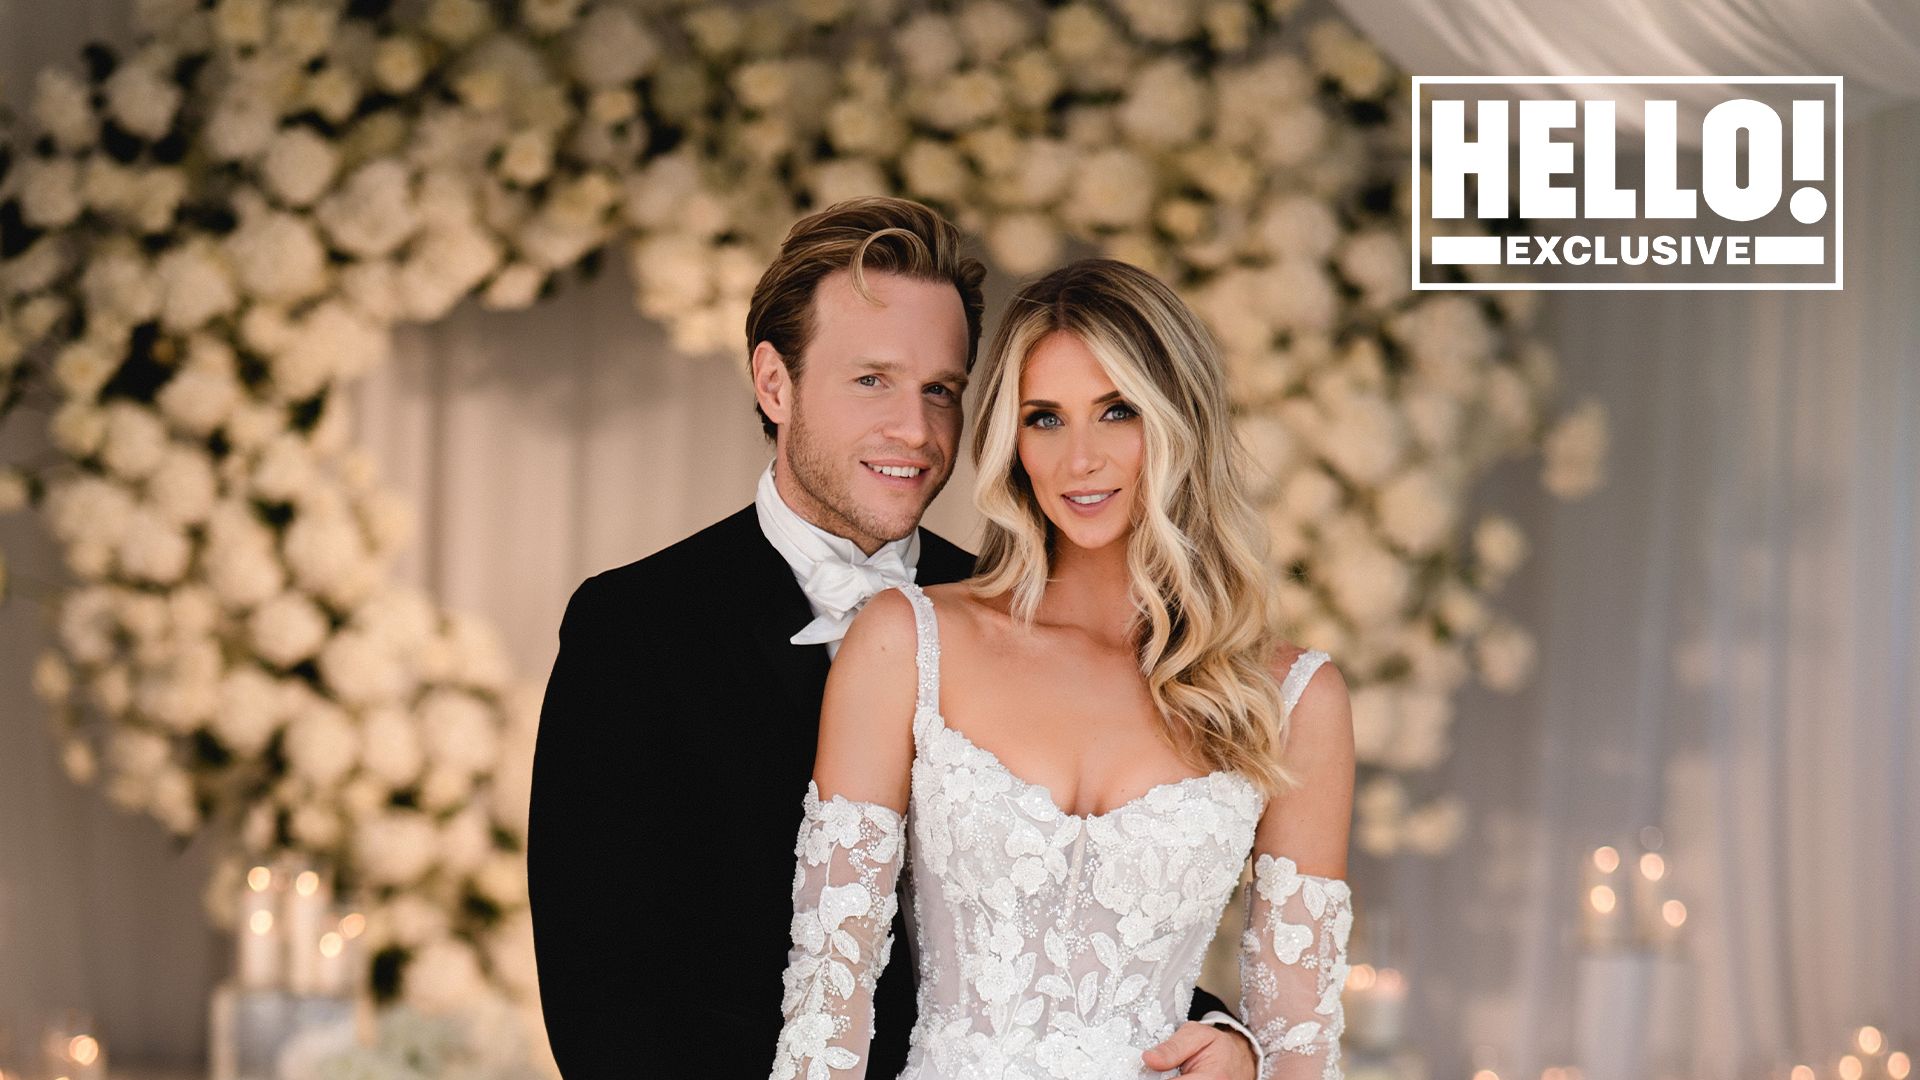 Exclusive: inside Olly Murs and Amelia Tank's magical wedding